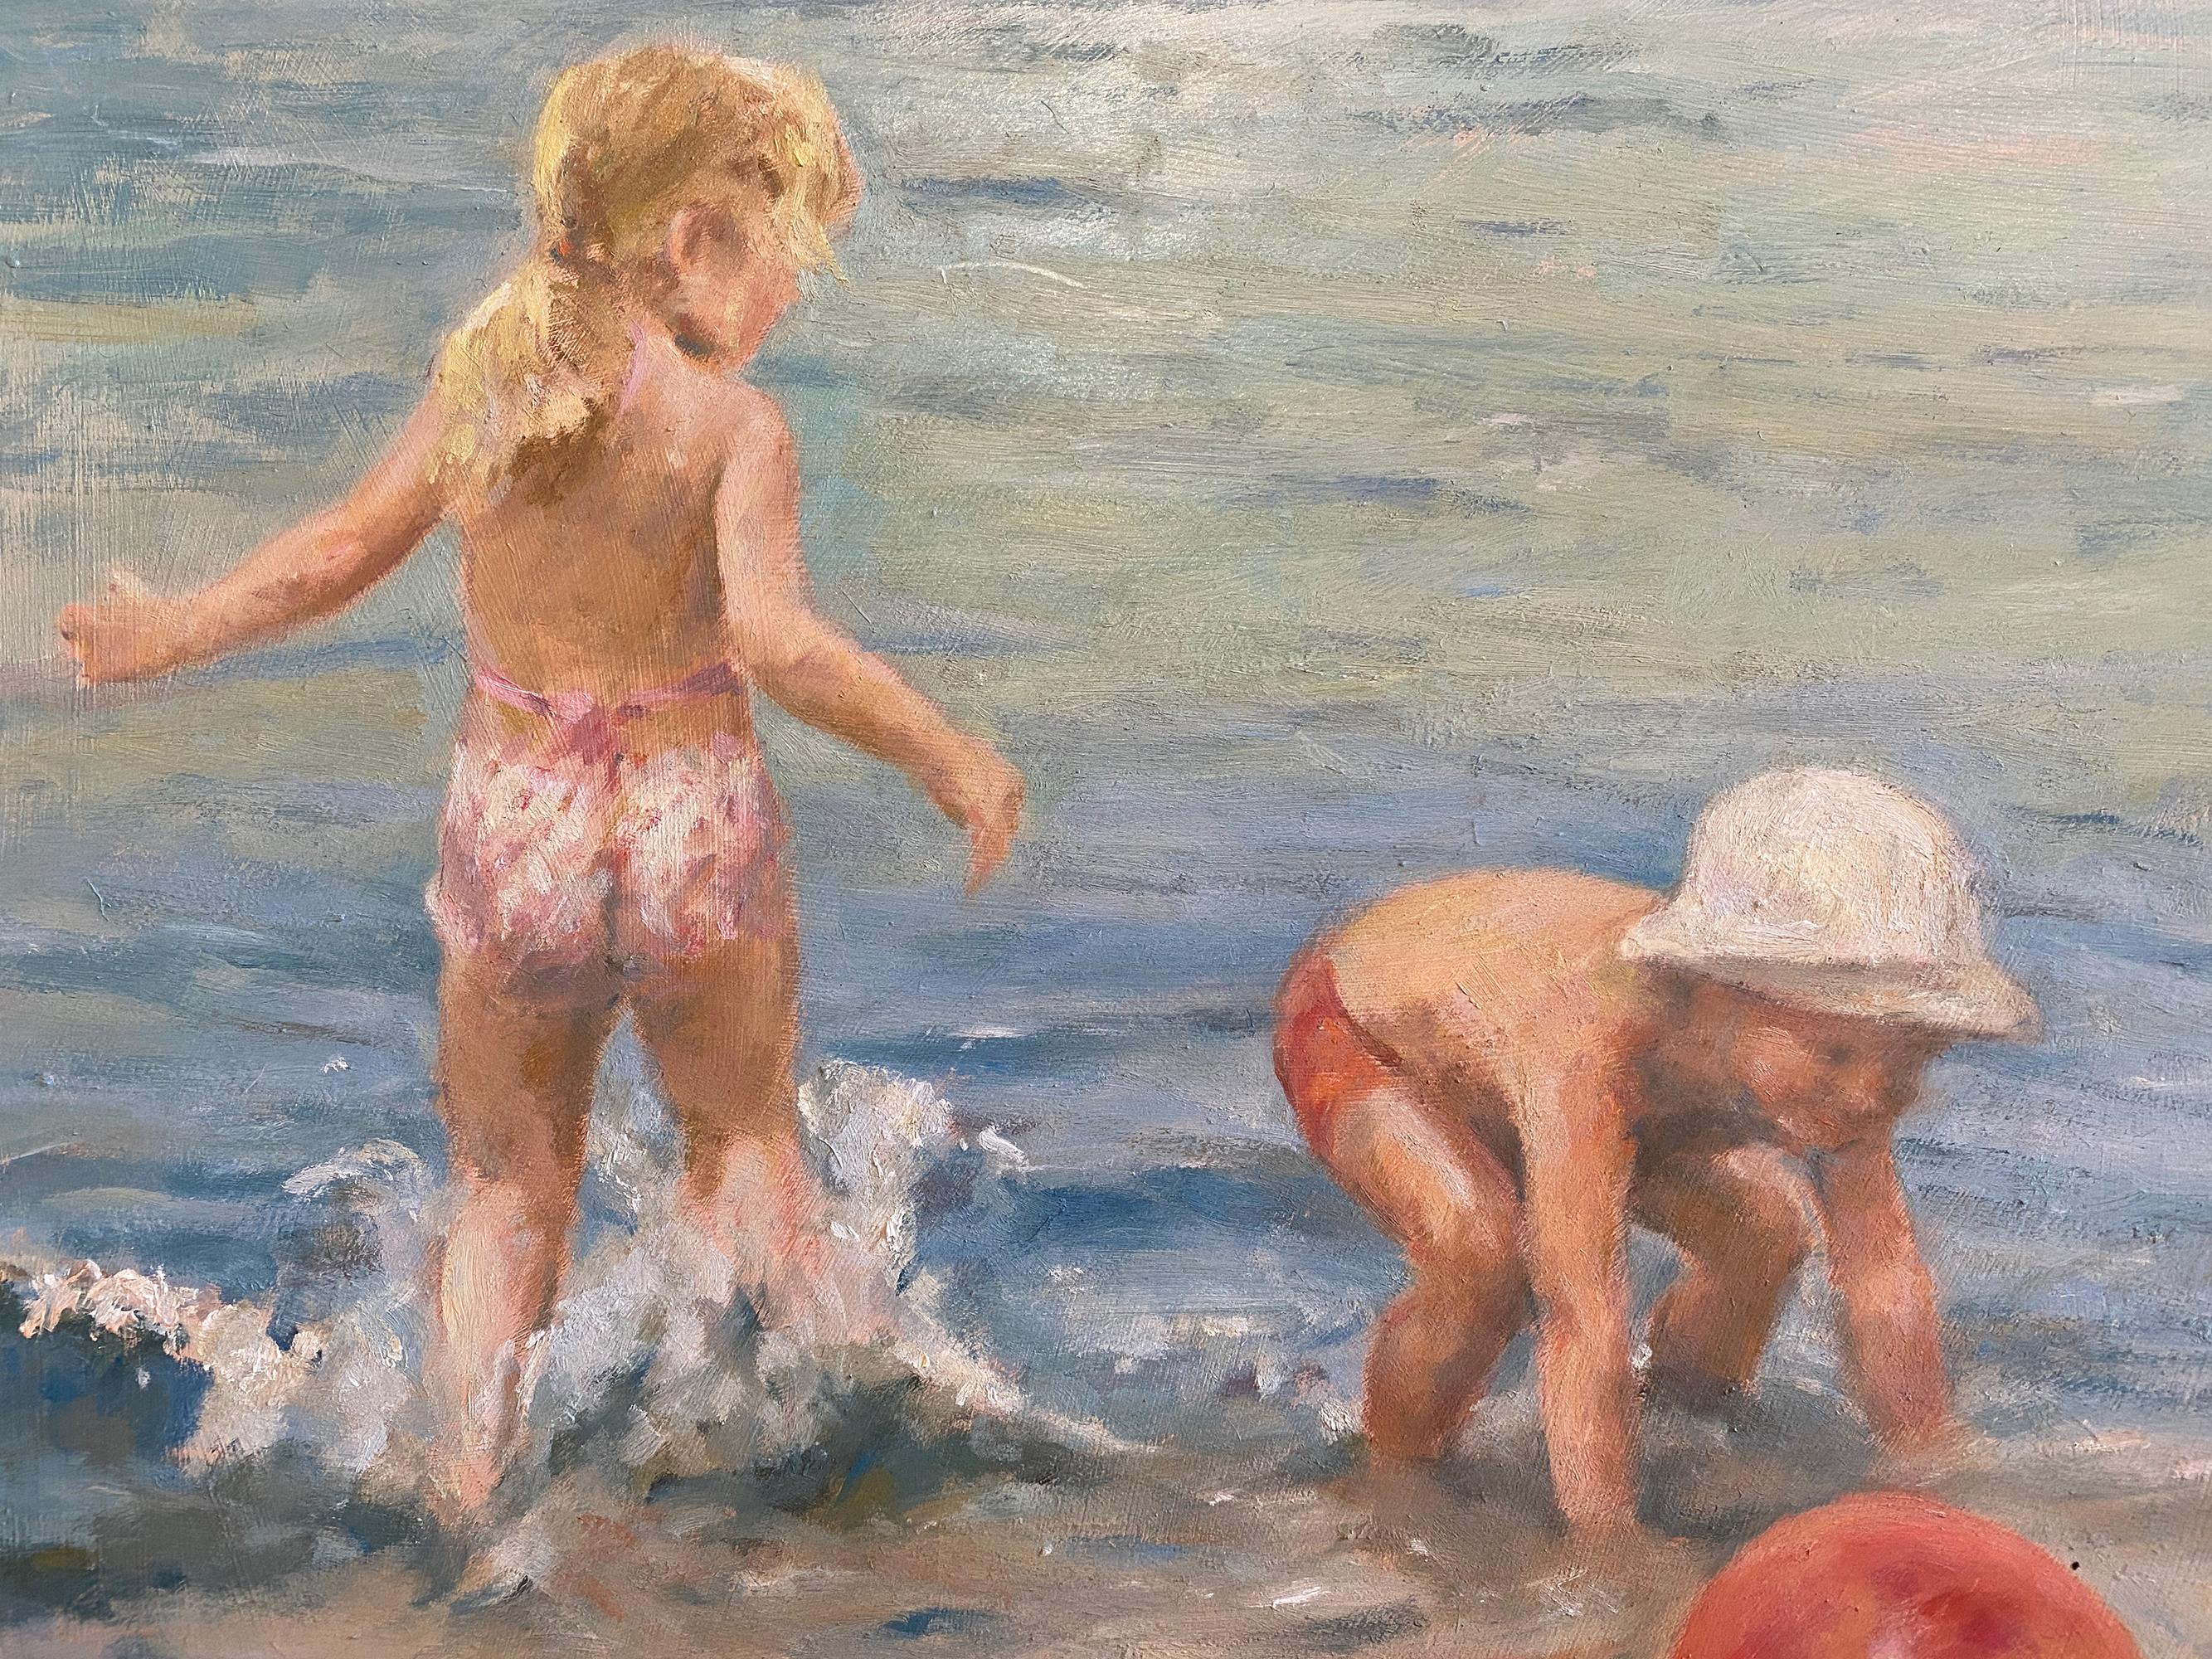 In Stobbe's oil on masonite painting, two children happily play splashing in the water at the beach with their beach ball in the sand, unaware of the viewer. The seaside beach scene is in a realistic, painterly style with the predominant colors of